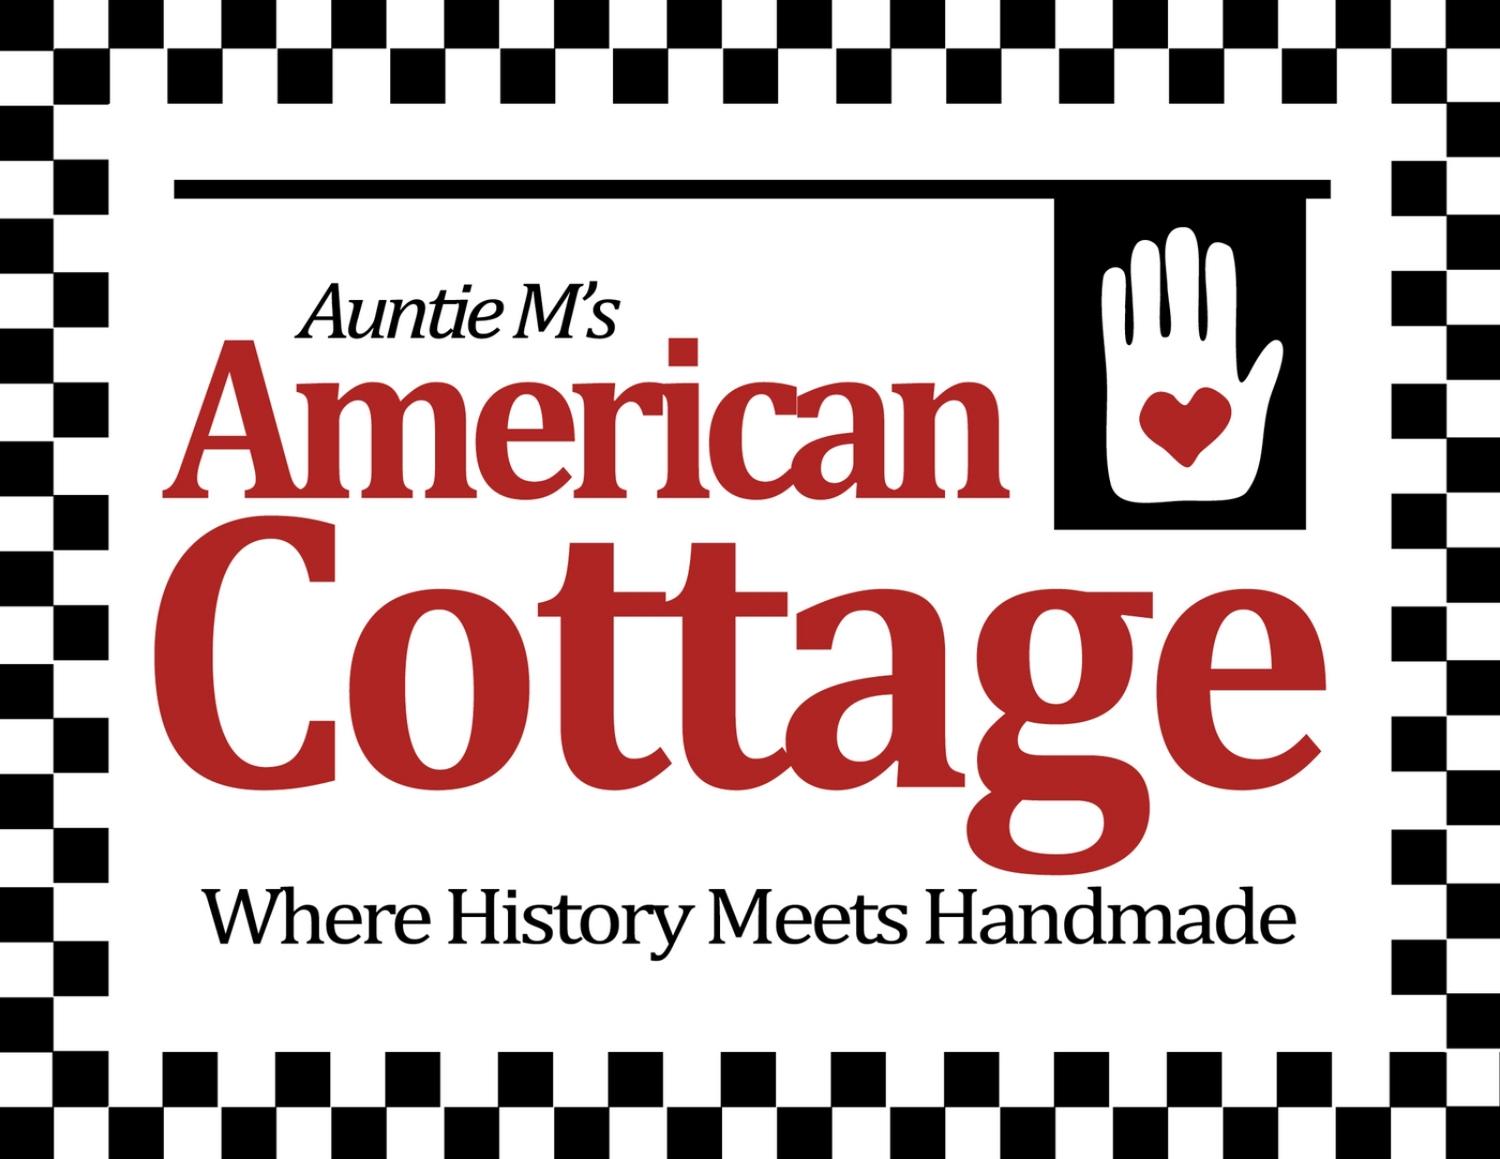 Auntie M’s American Cottage